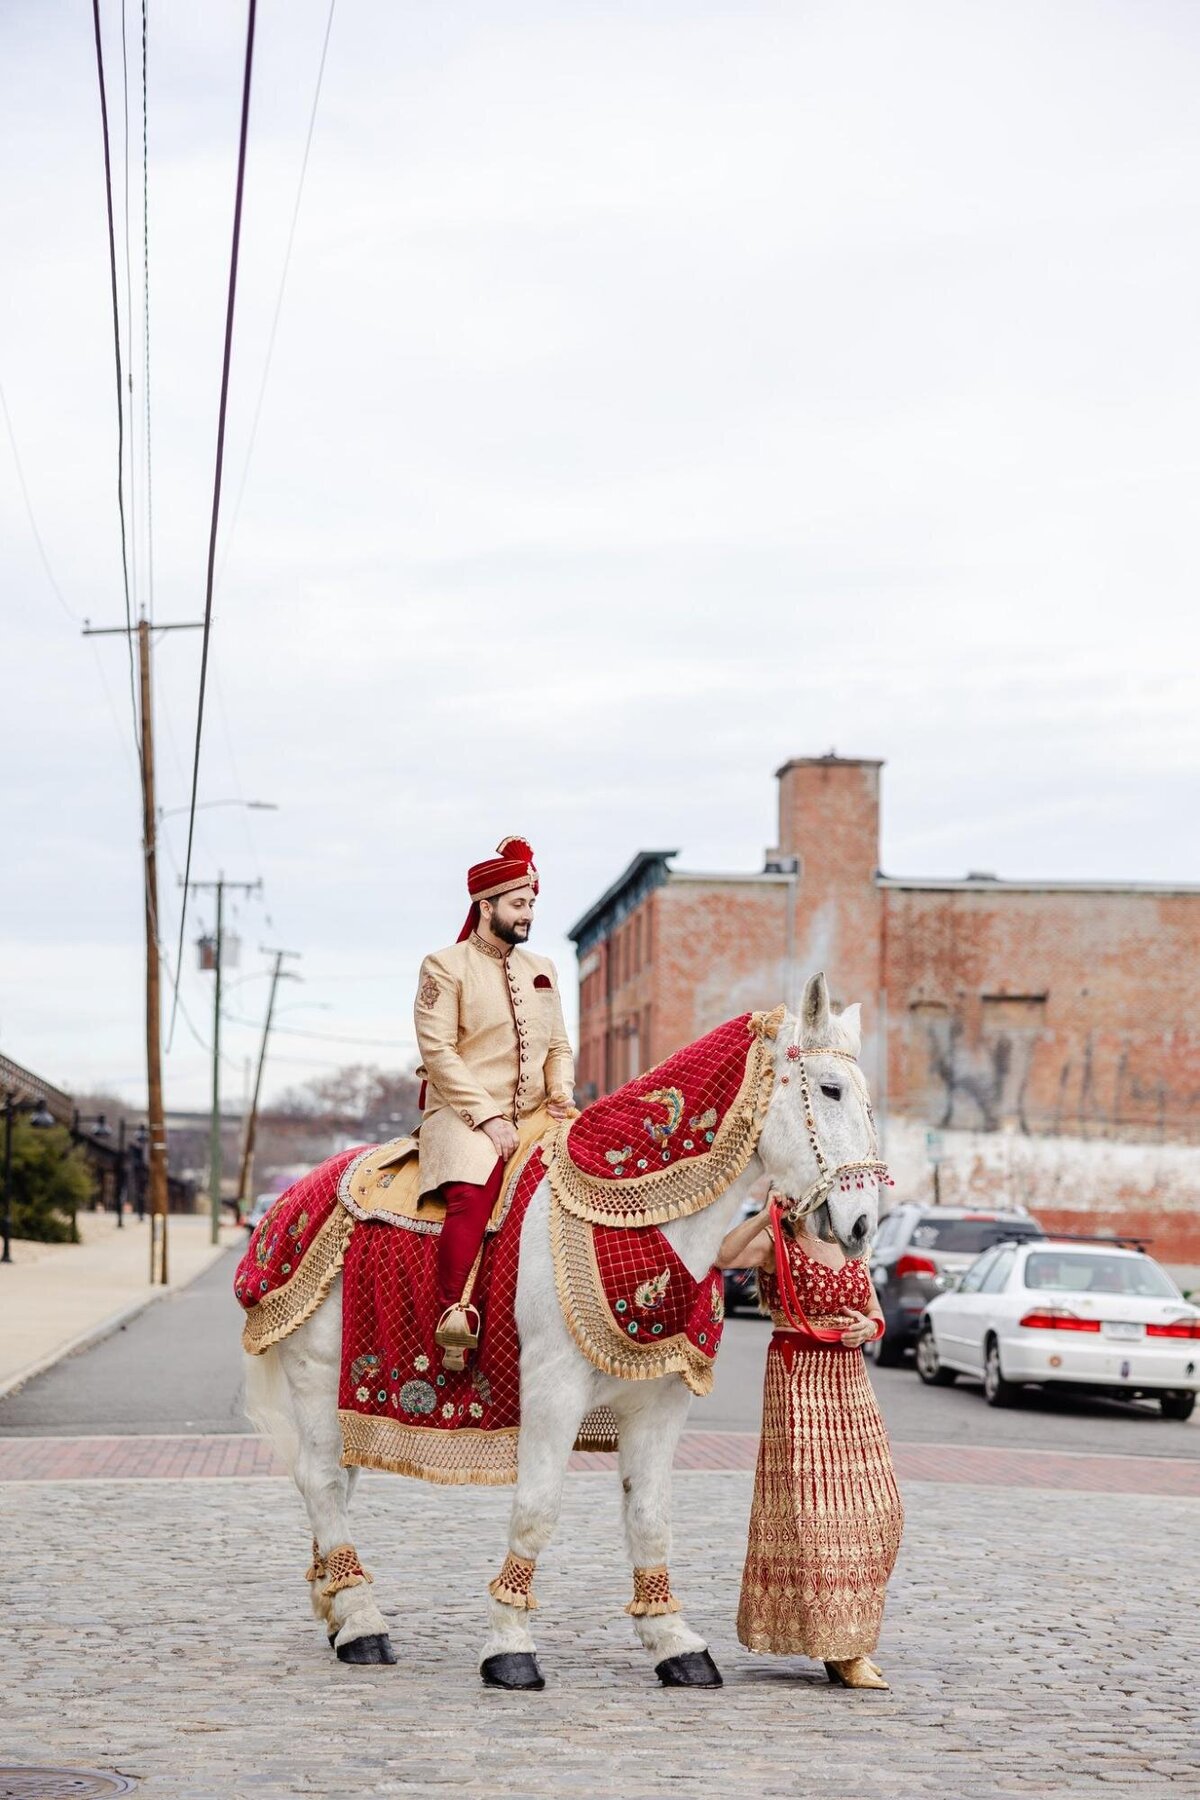 Man in traditional attire riding a decorated horse on an urban street.